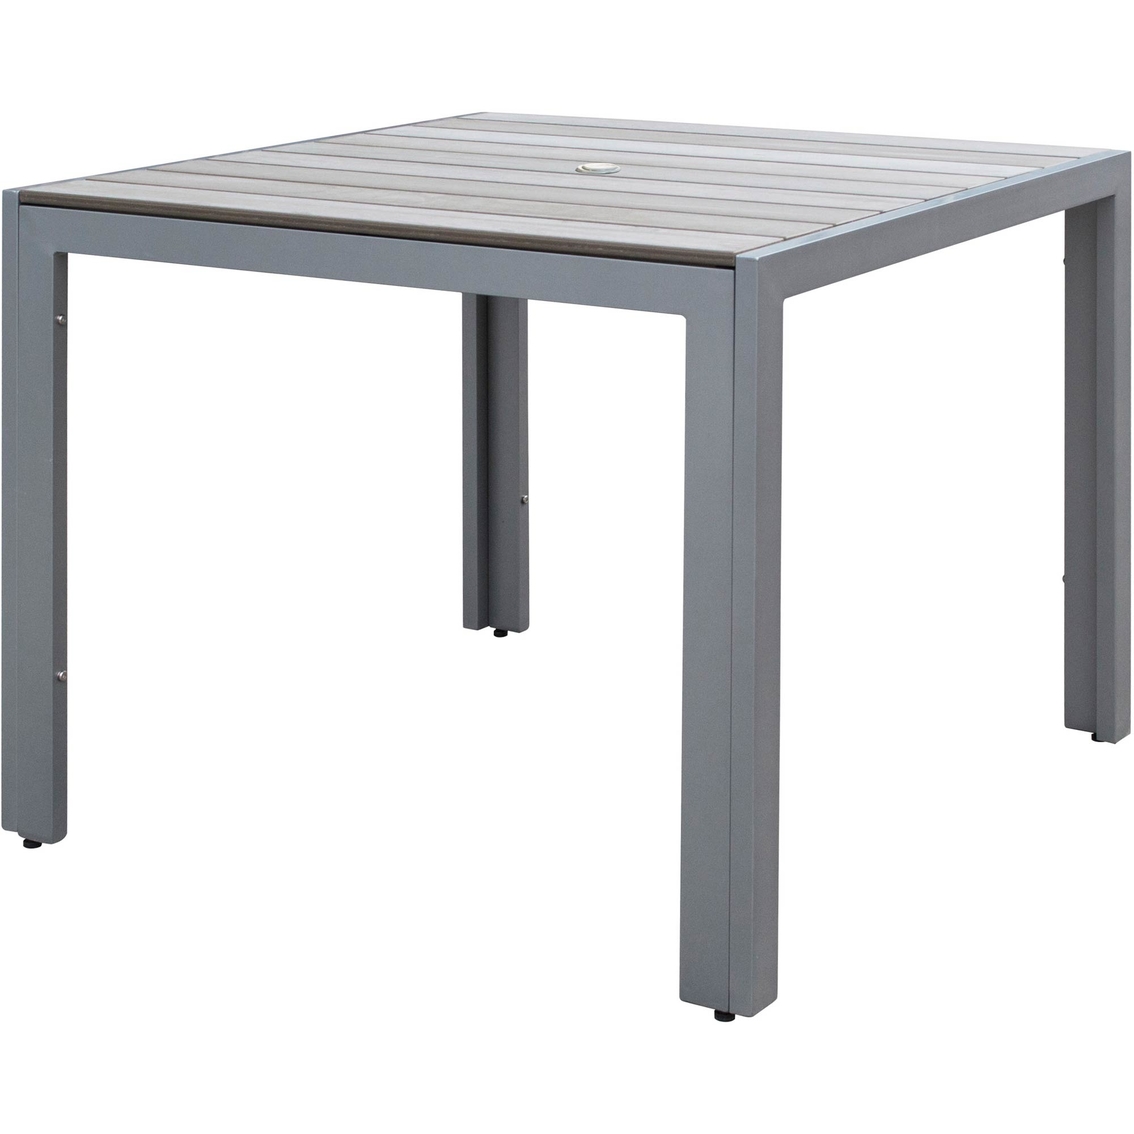 CorLiving Gallant Square Outdoor Dining Table - Image 2 of 6